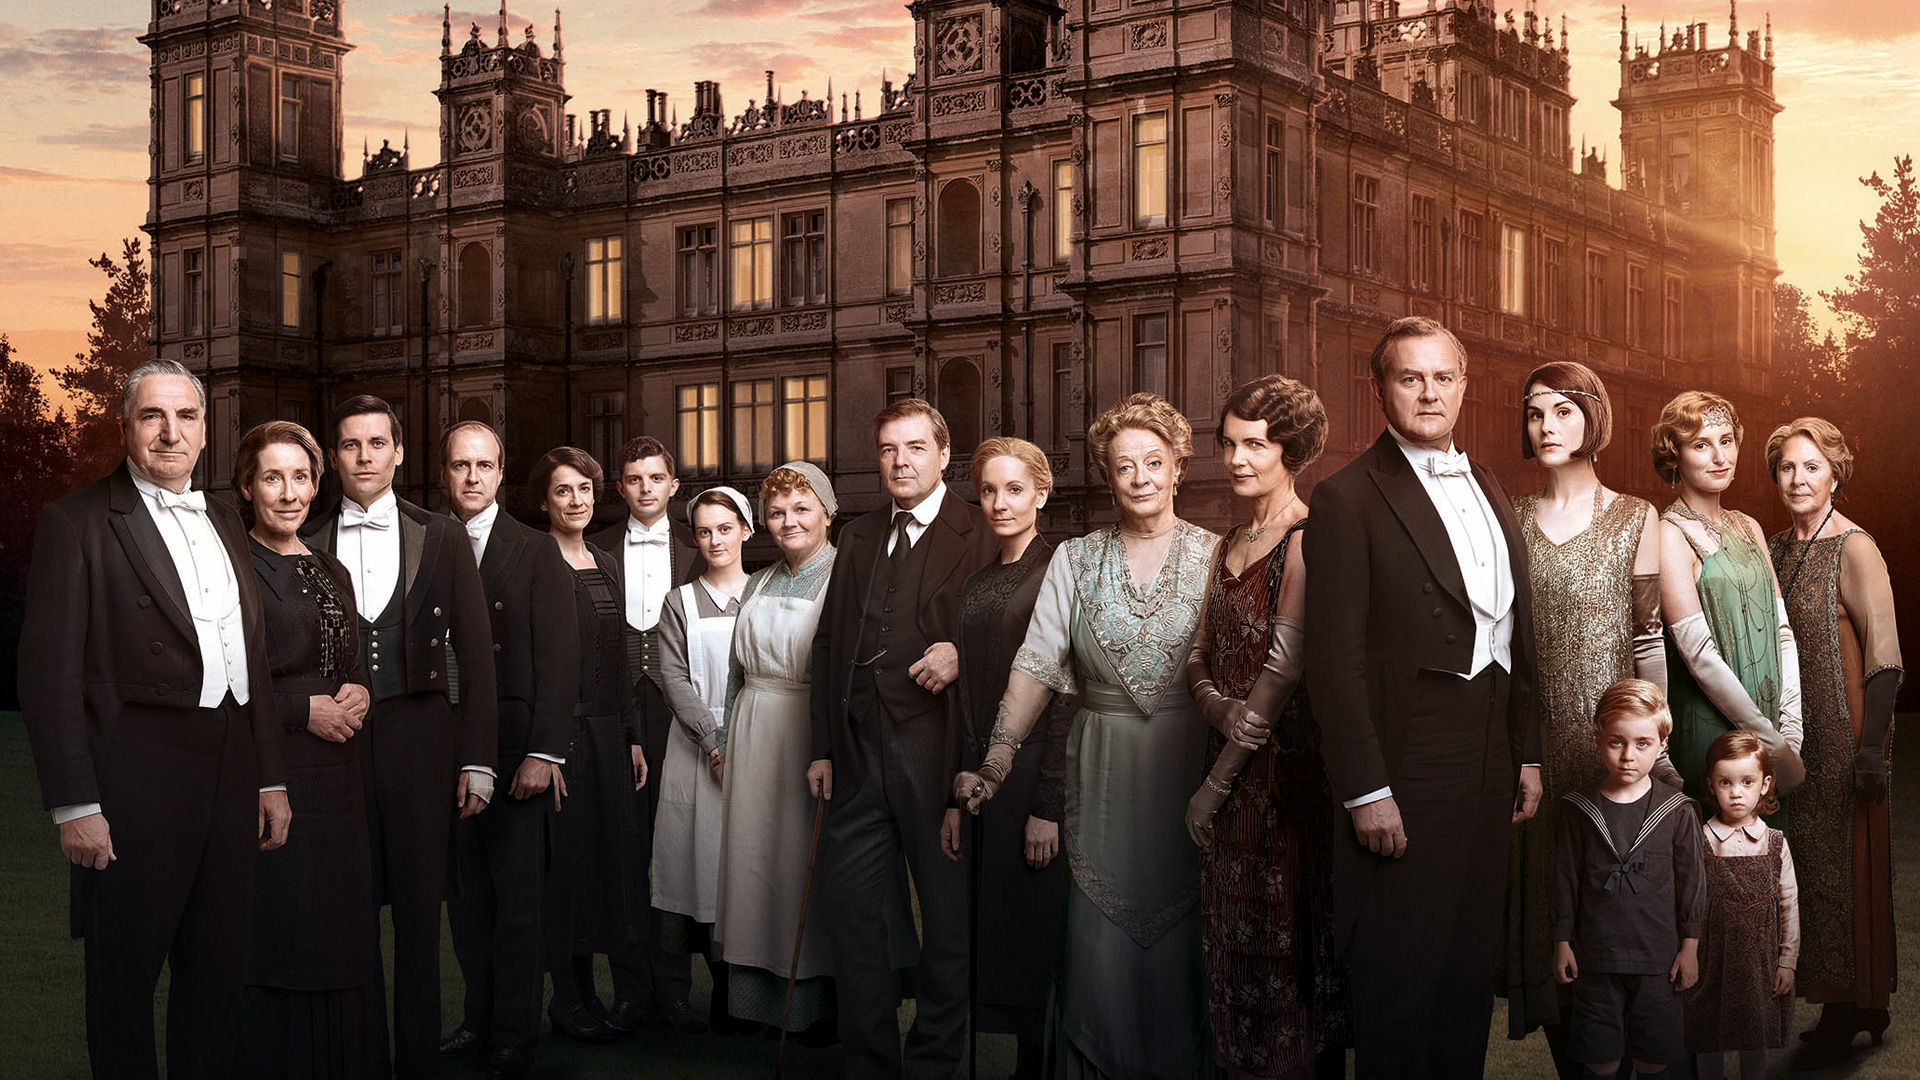 Downtown Abbey PBS cover image from the Emmy Awards